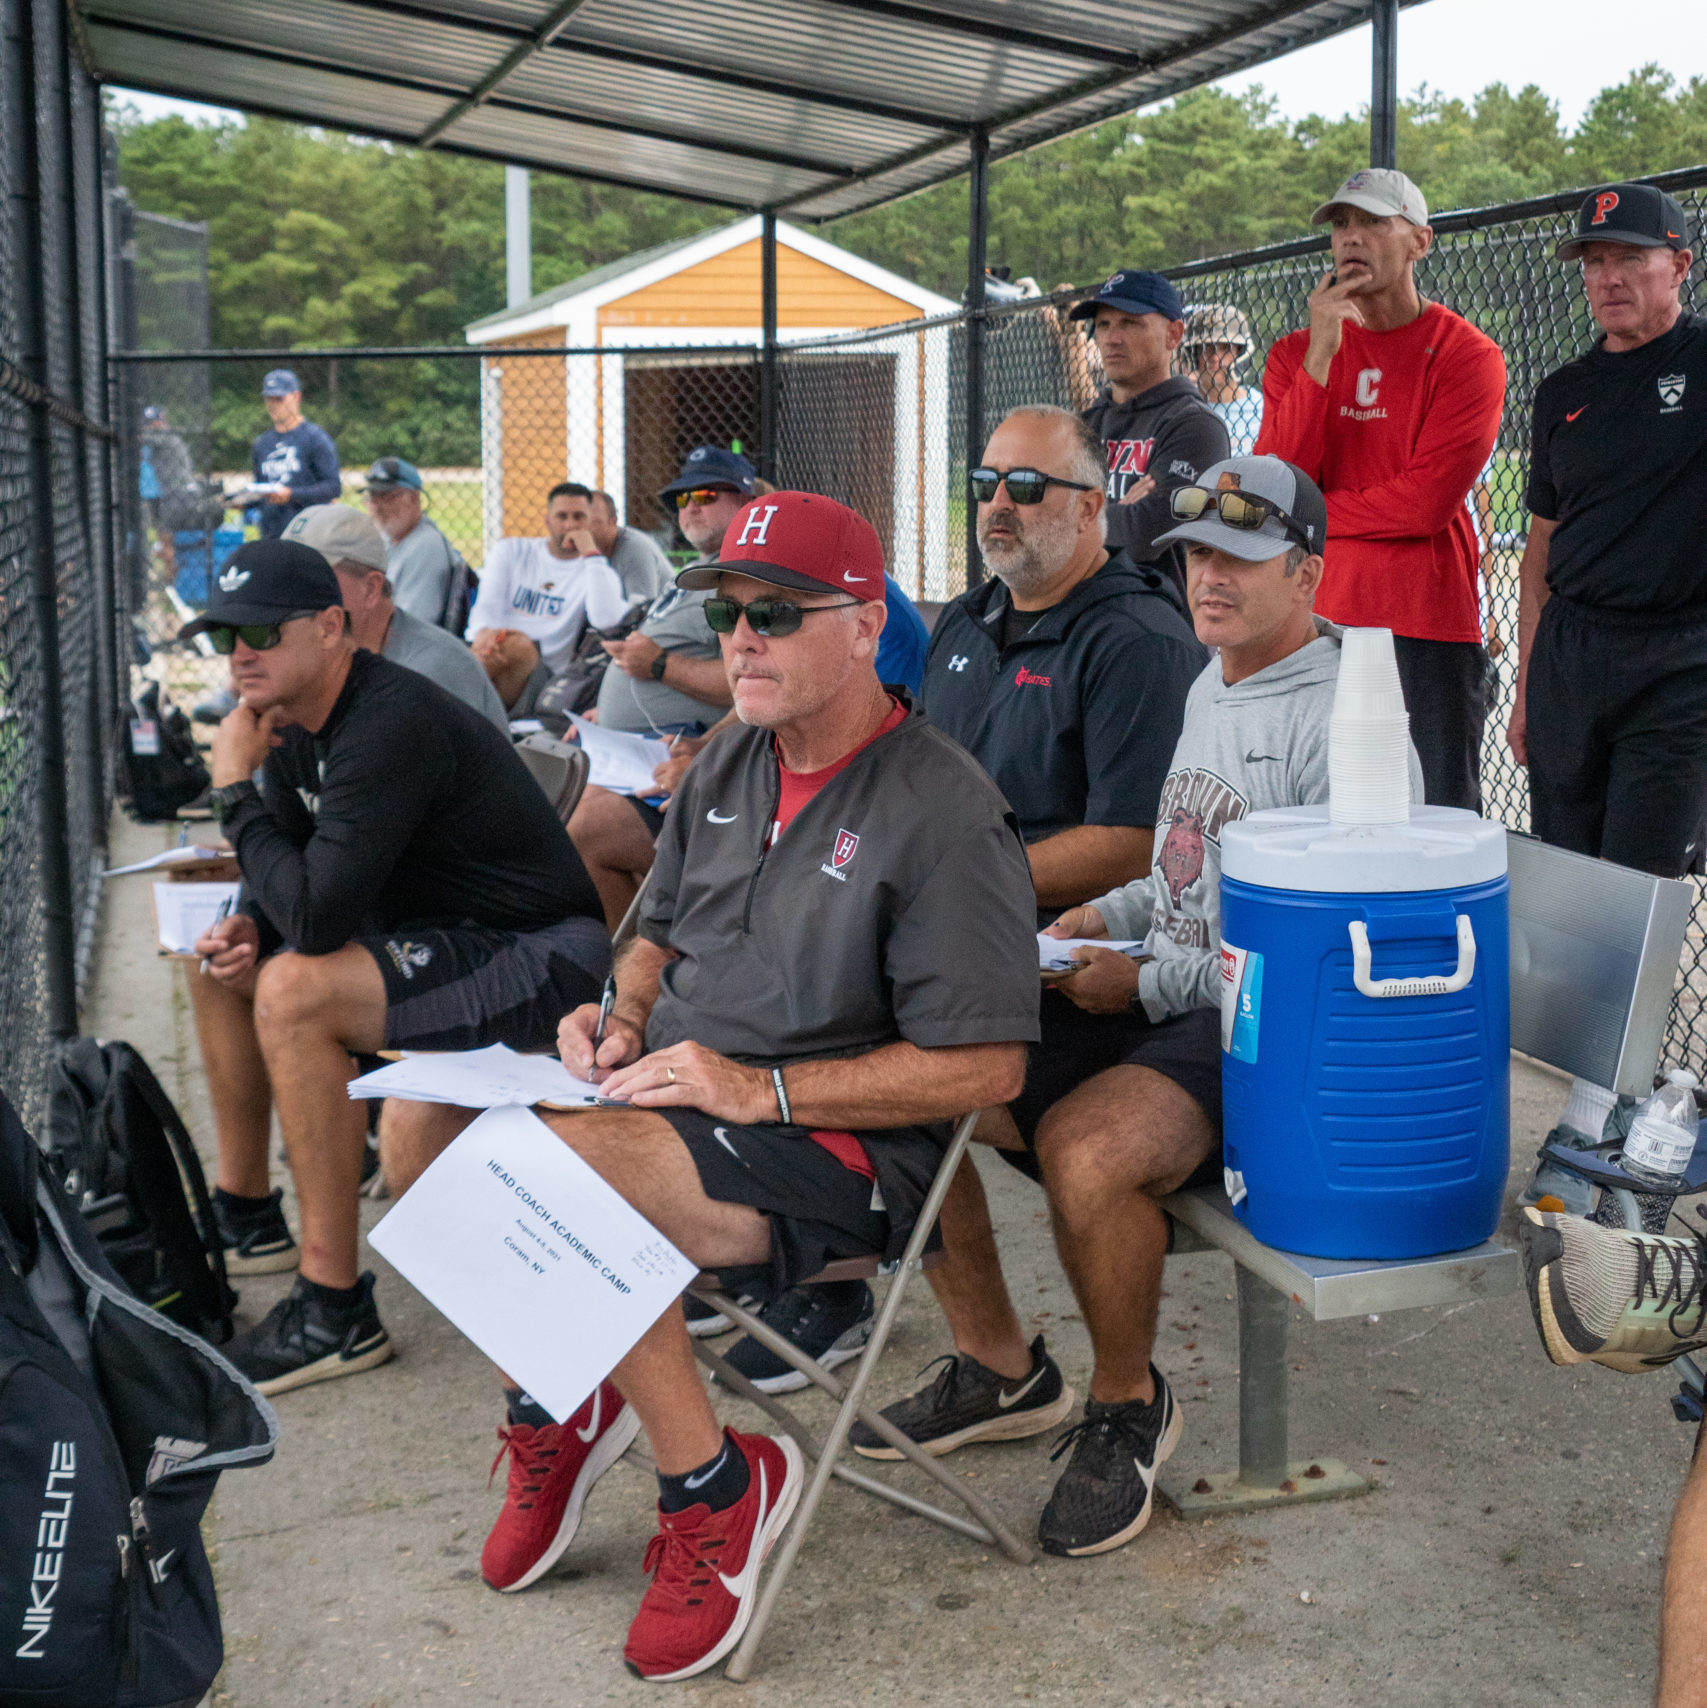 showball-camps-ivy-league-coaches-attend